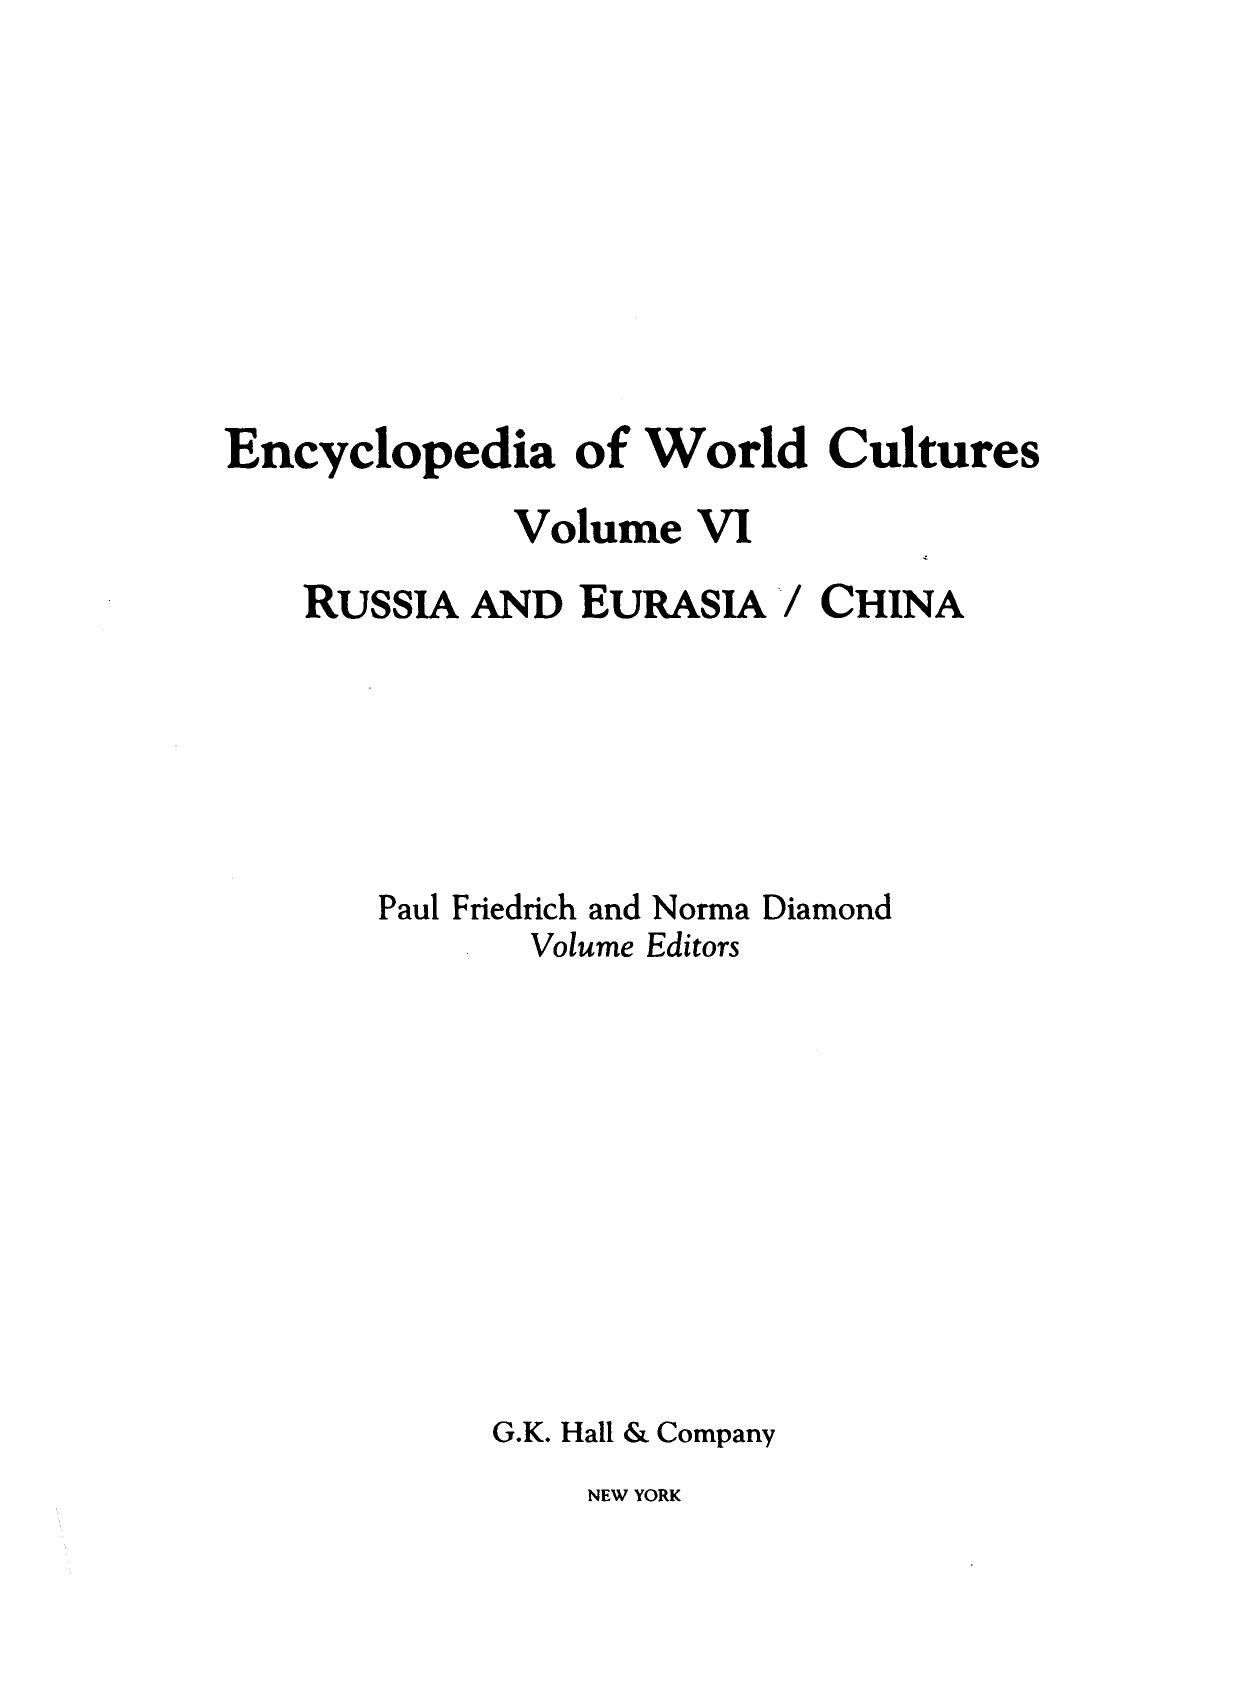 Encyclopedia of World Cultures - Volum 6 - Russia and Eurasia, China